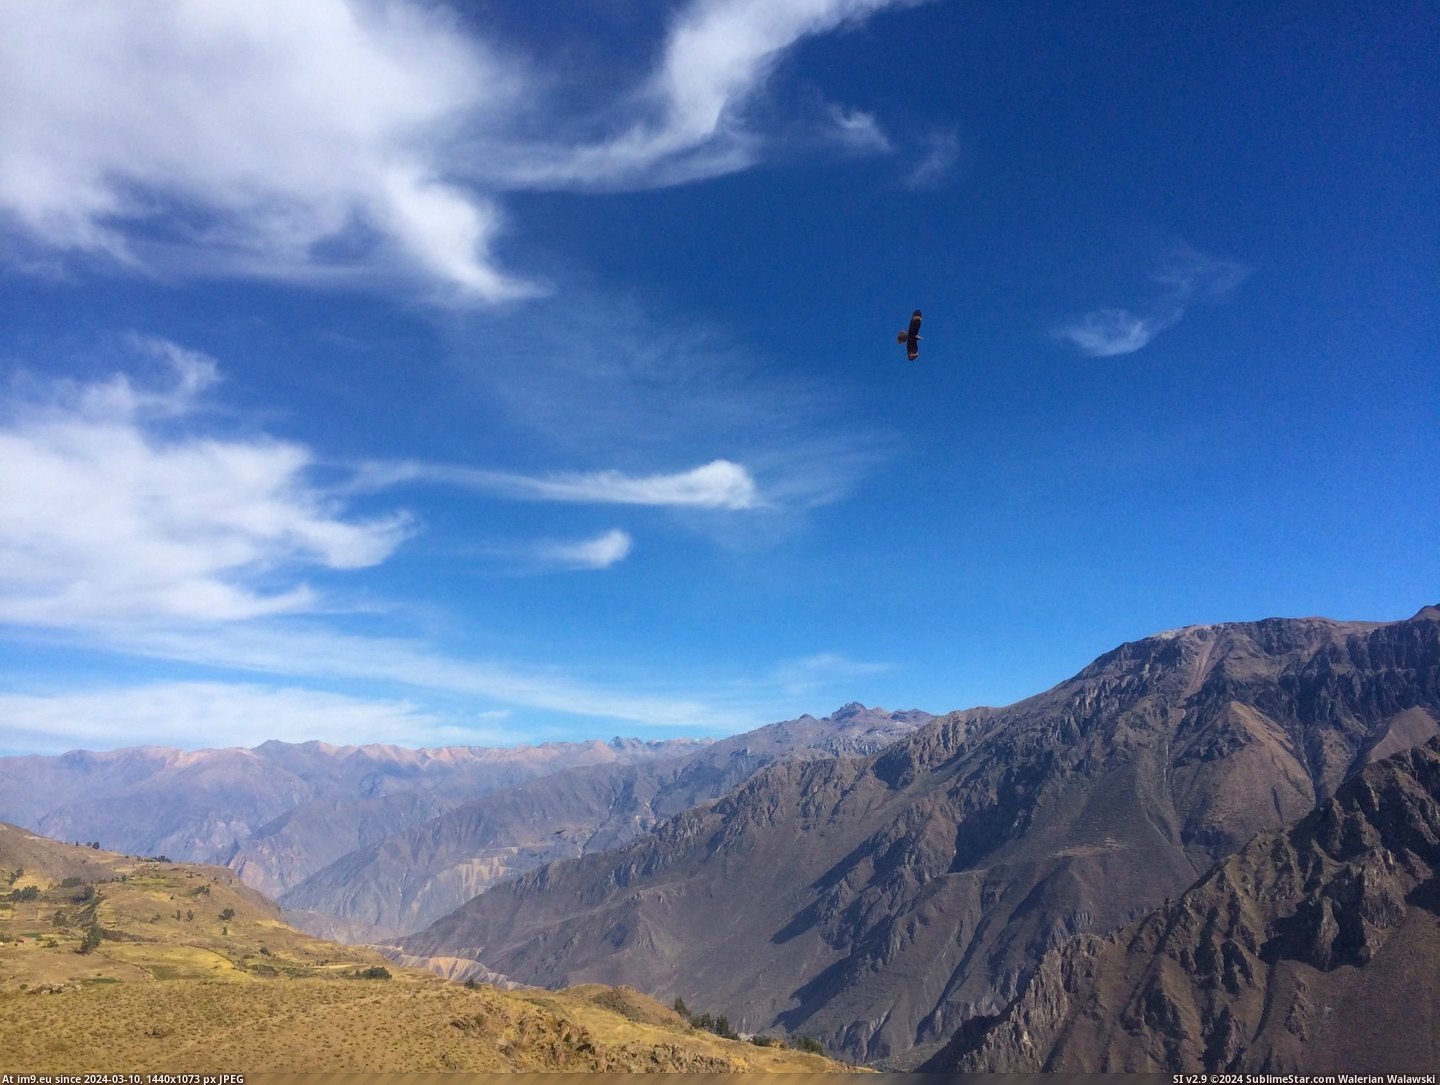 #One #World #Baby #Solo #Deepest #Canyons #Condor #Canyon #3264x2448 #Flying #Peru [Earthporn]  A baby andean condor flying solo above Colca Canyon, Peru (one of the deepest canyons in the world) [3264x2448] Pic. (Image of album My r/EARTHPORN favs))